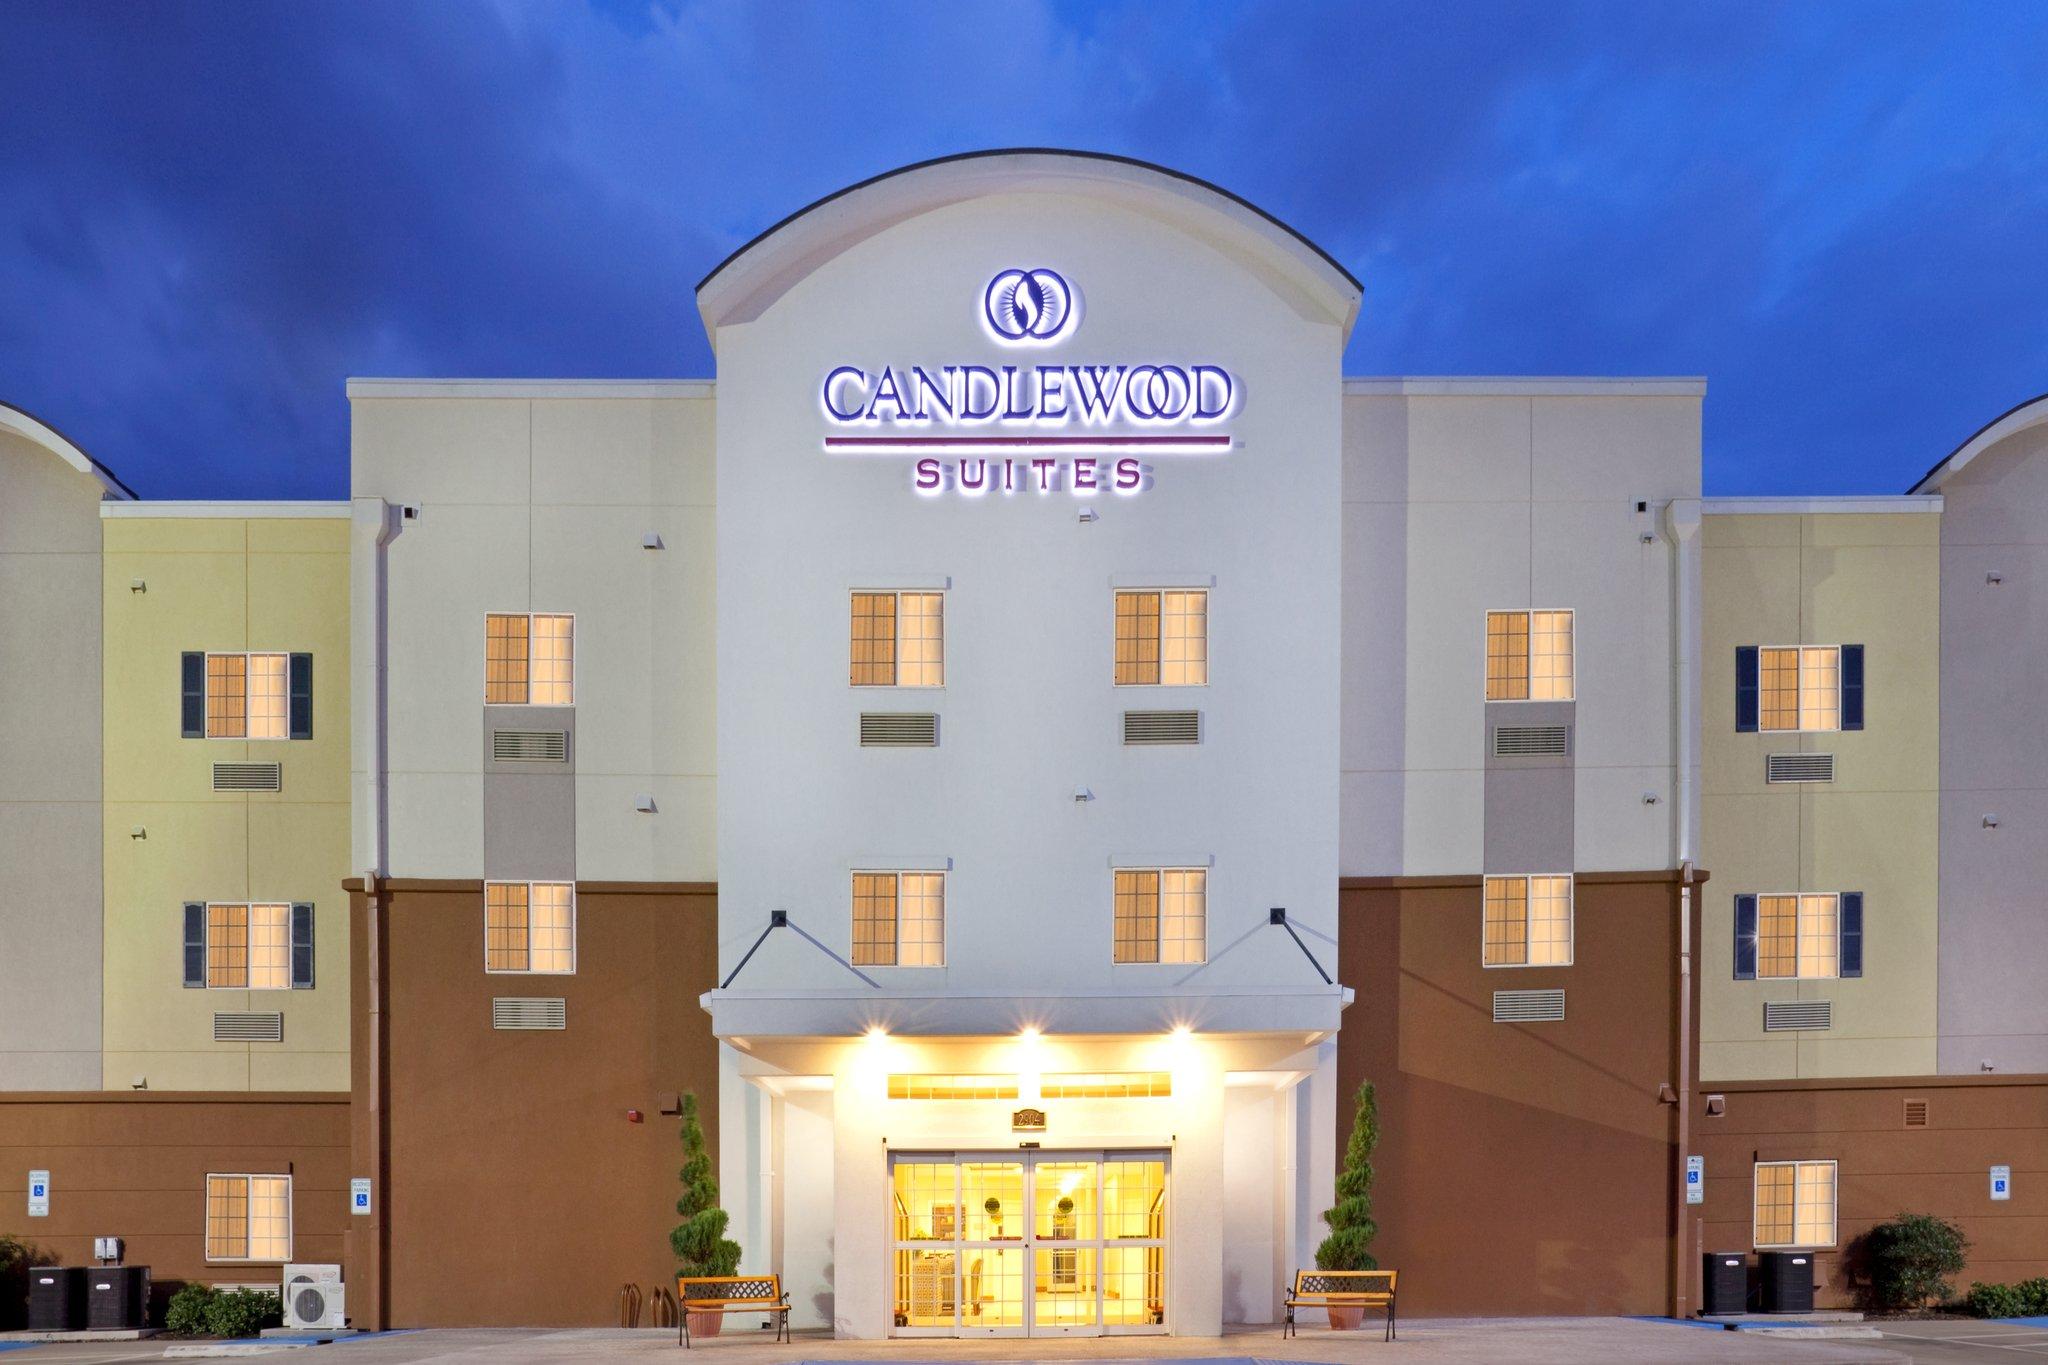 Candlewood Suites Plano North in Plano, TX